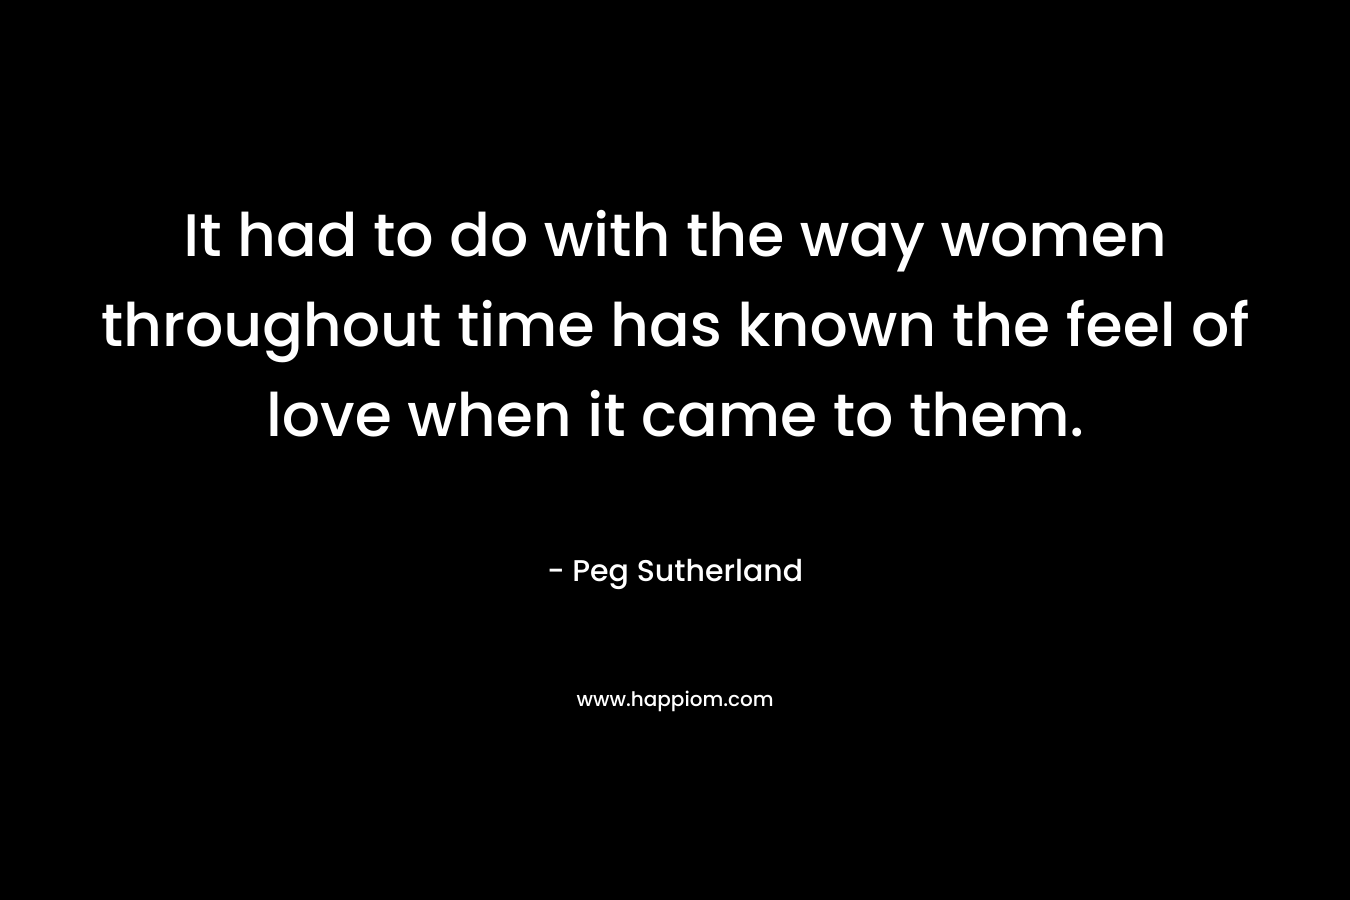 It had to do with the way women throughout time has known the feel of love when it came to them.